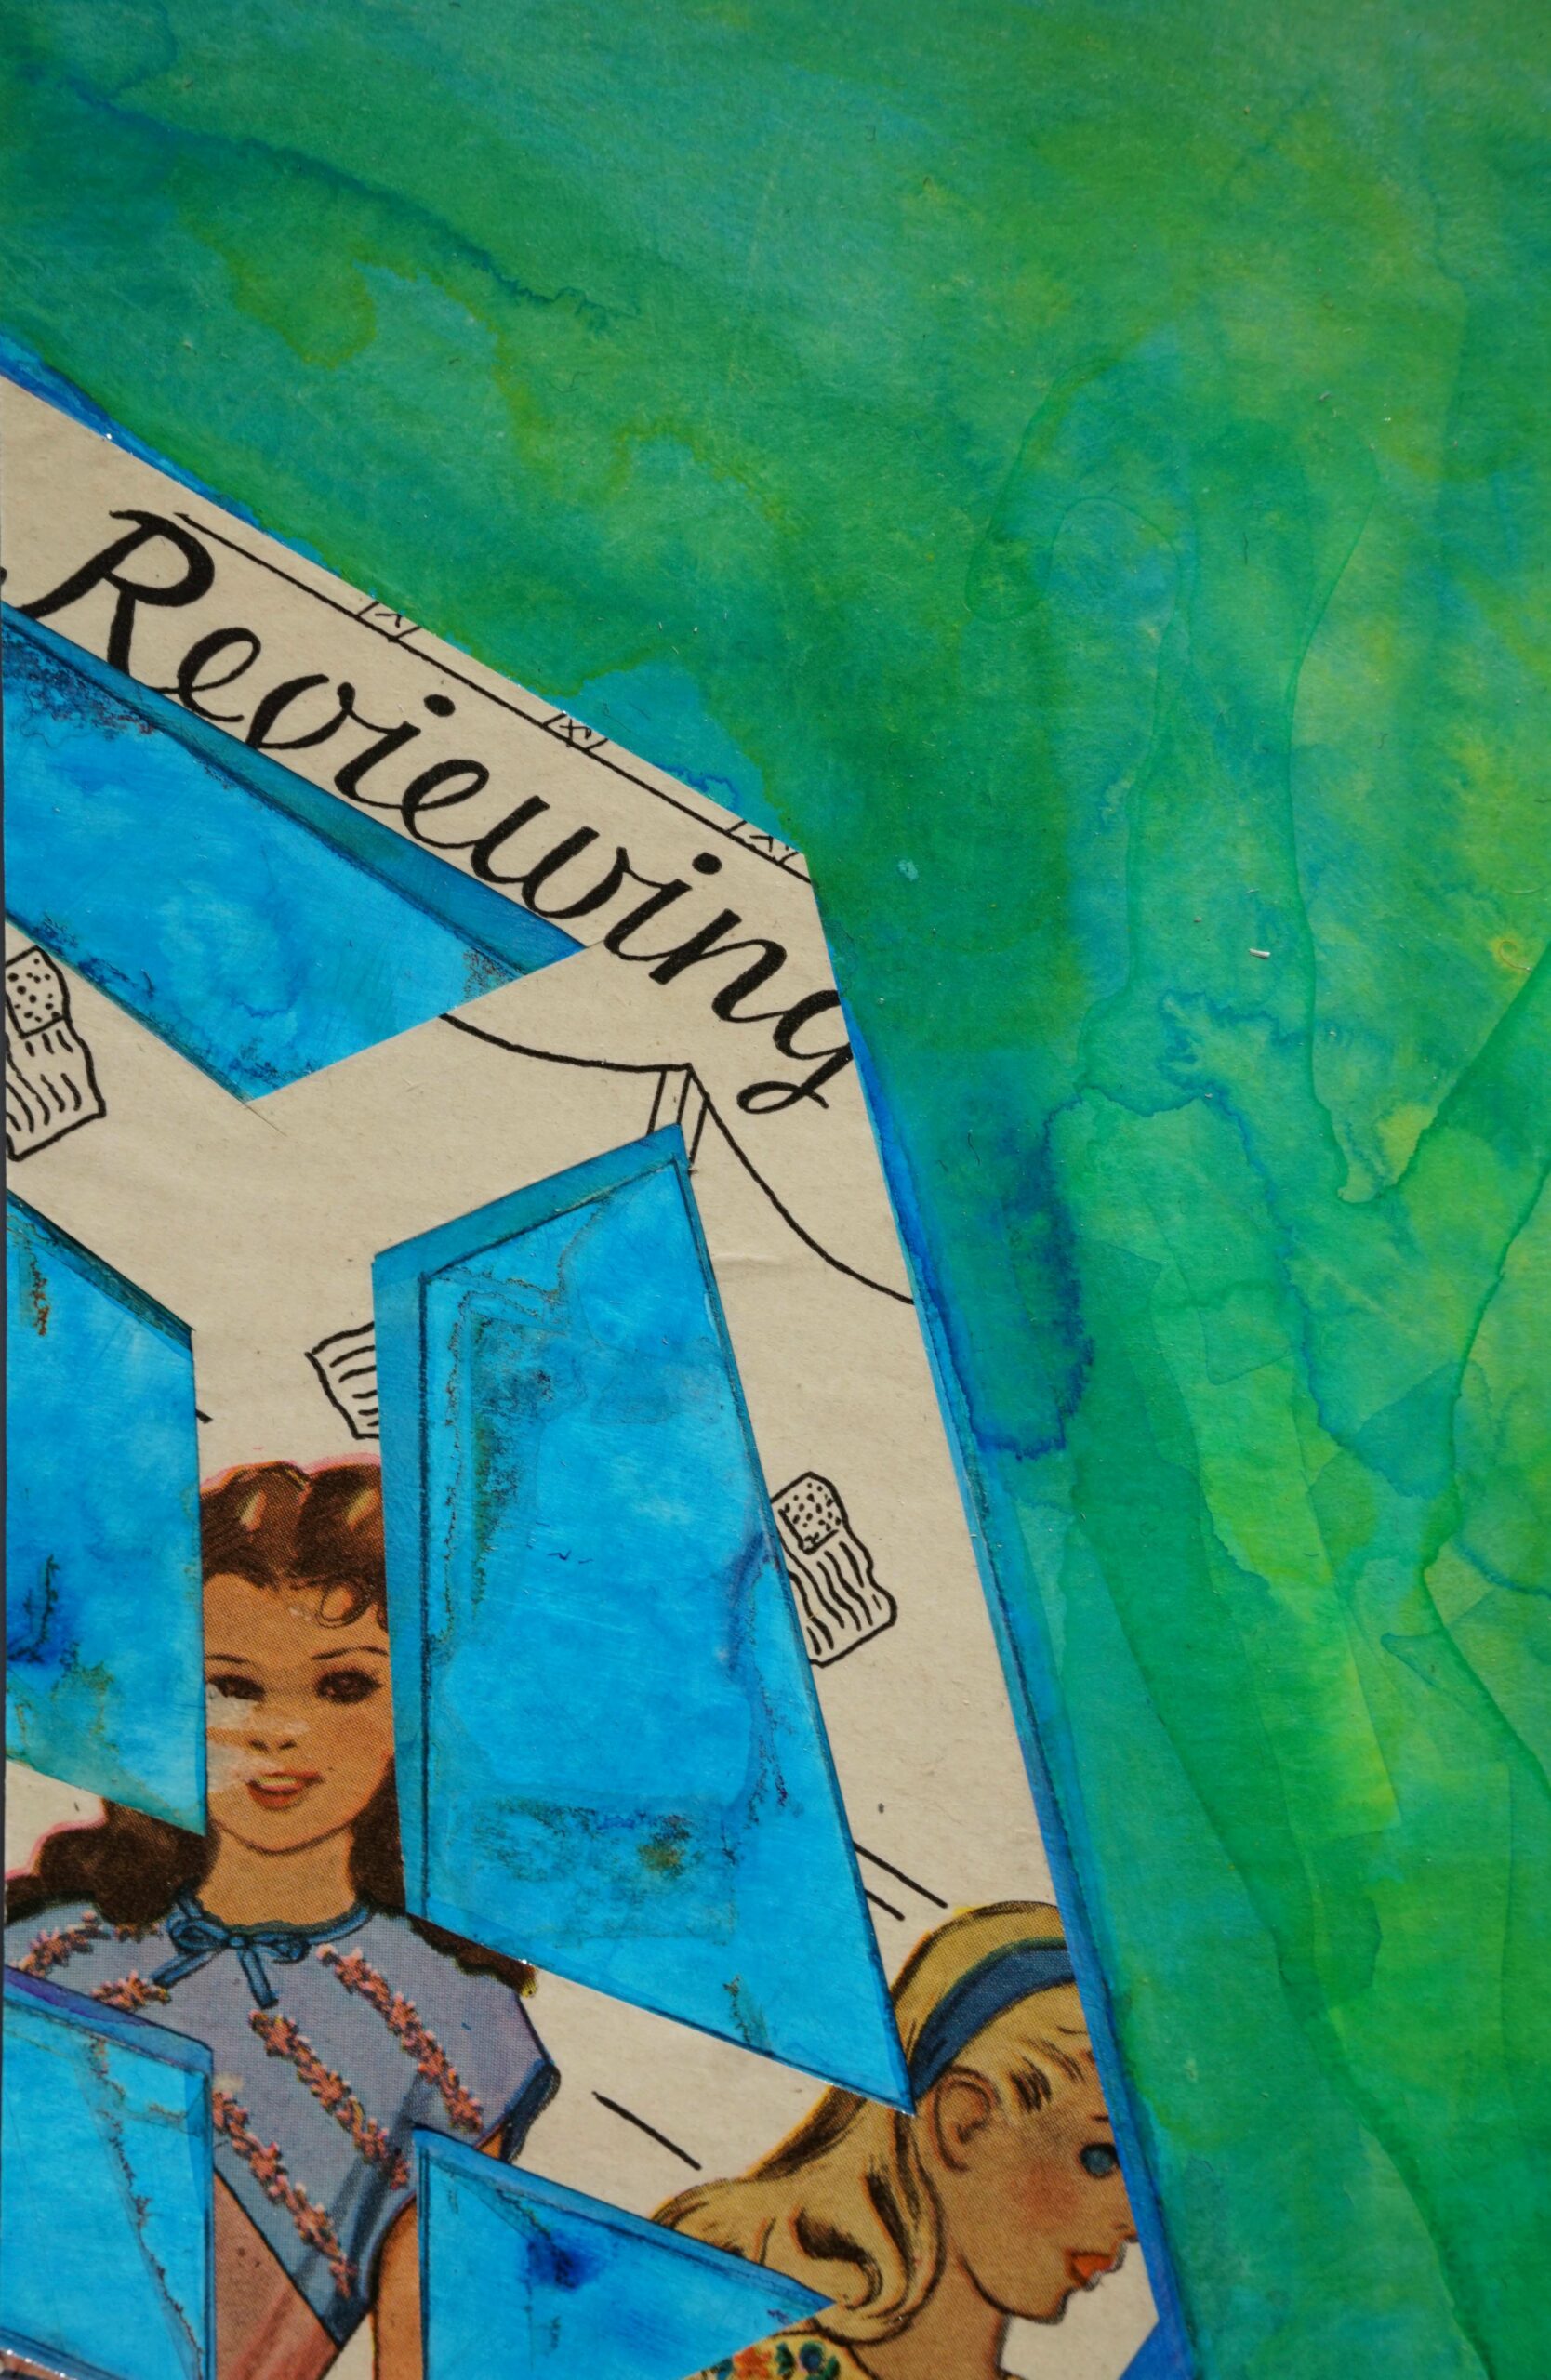 A drippy painting/collage incorporating a 1940s (?) magazine illustration with parts of two girls' upper bodies and three cut up flags; the word "Reviewing" is discernible, written in clunky script